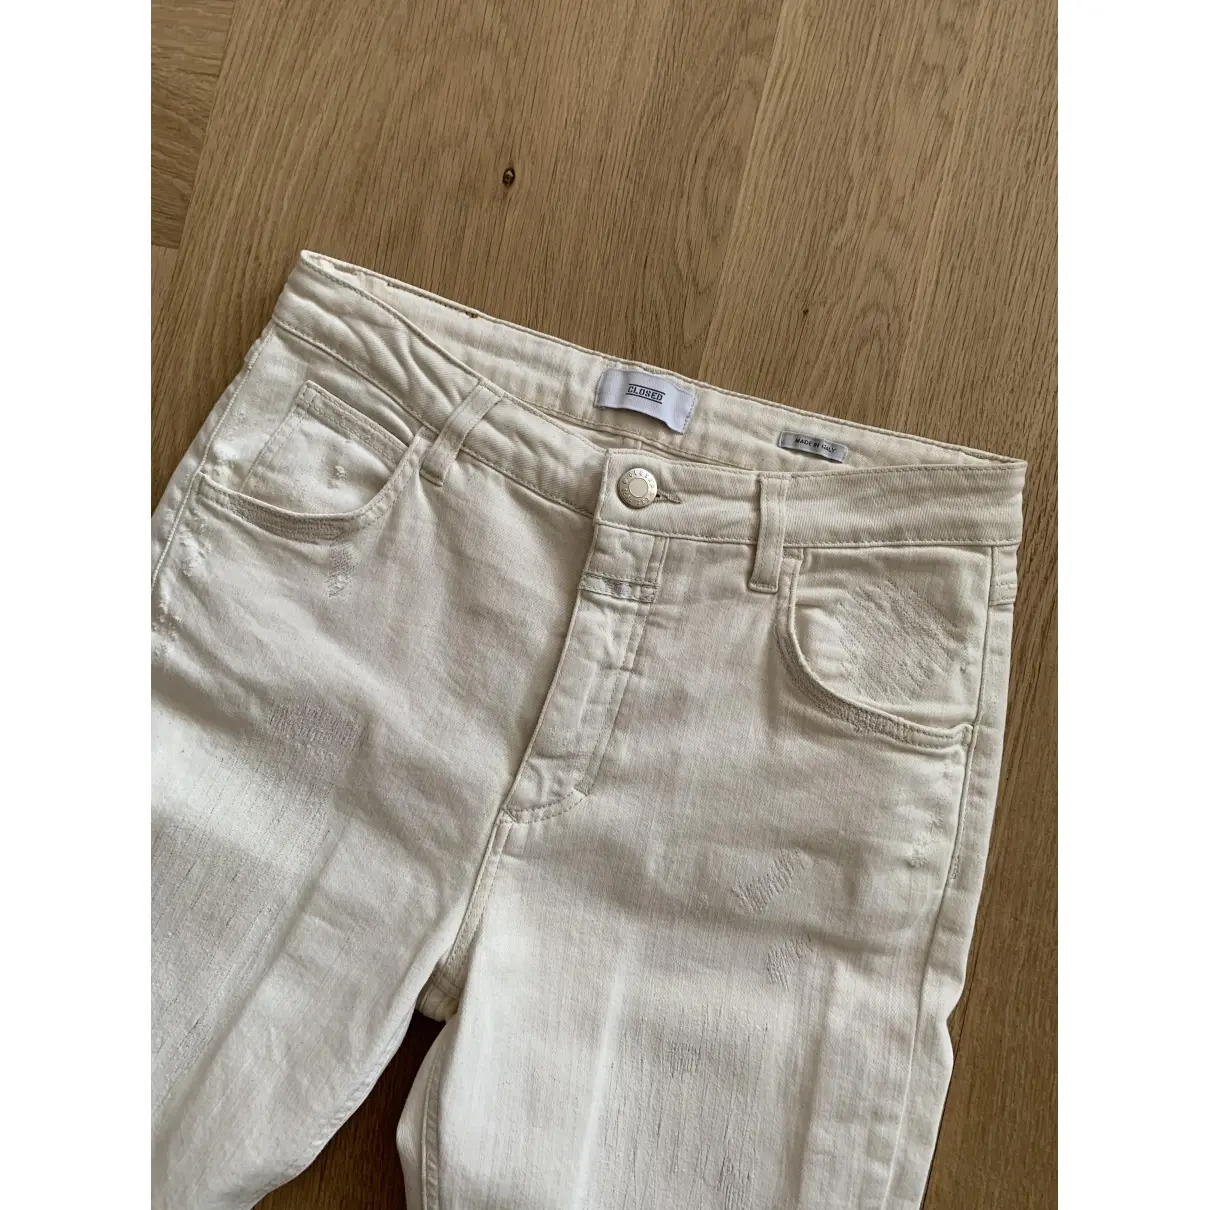 Closed Cotton - elasthane Jeans for sale